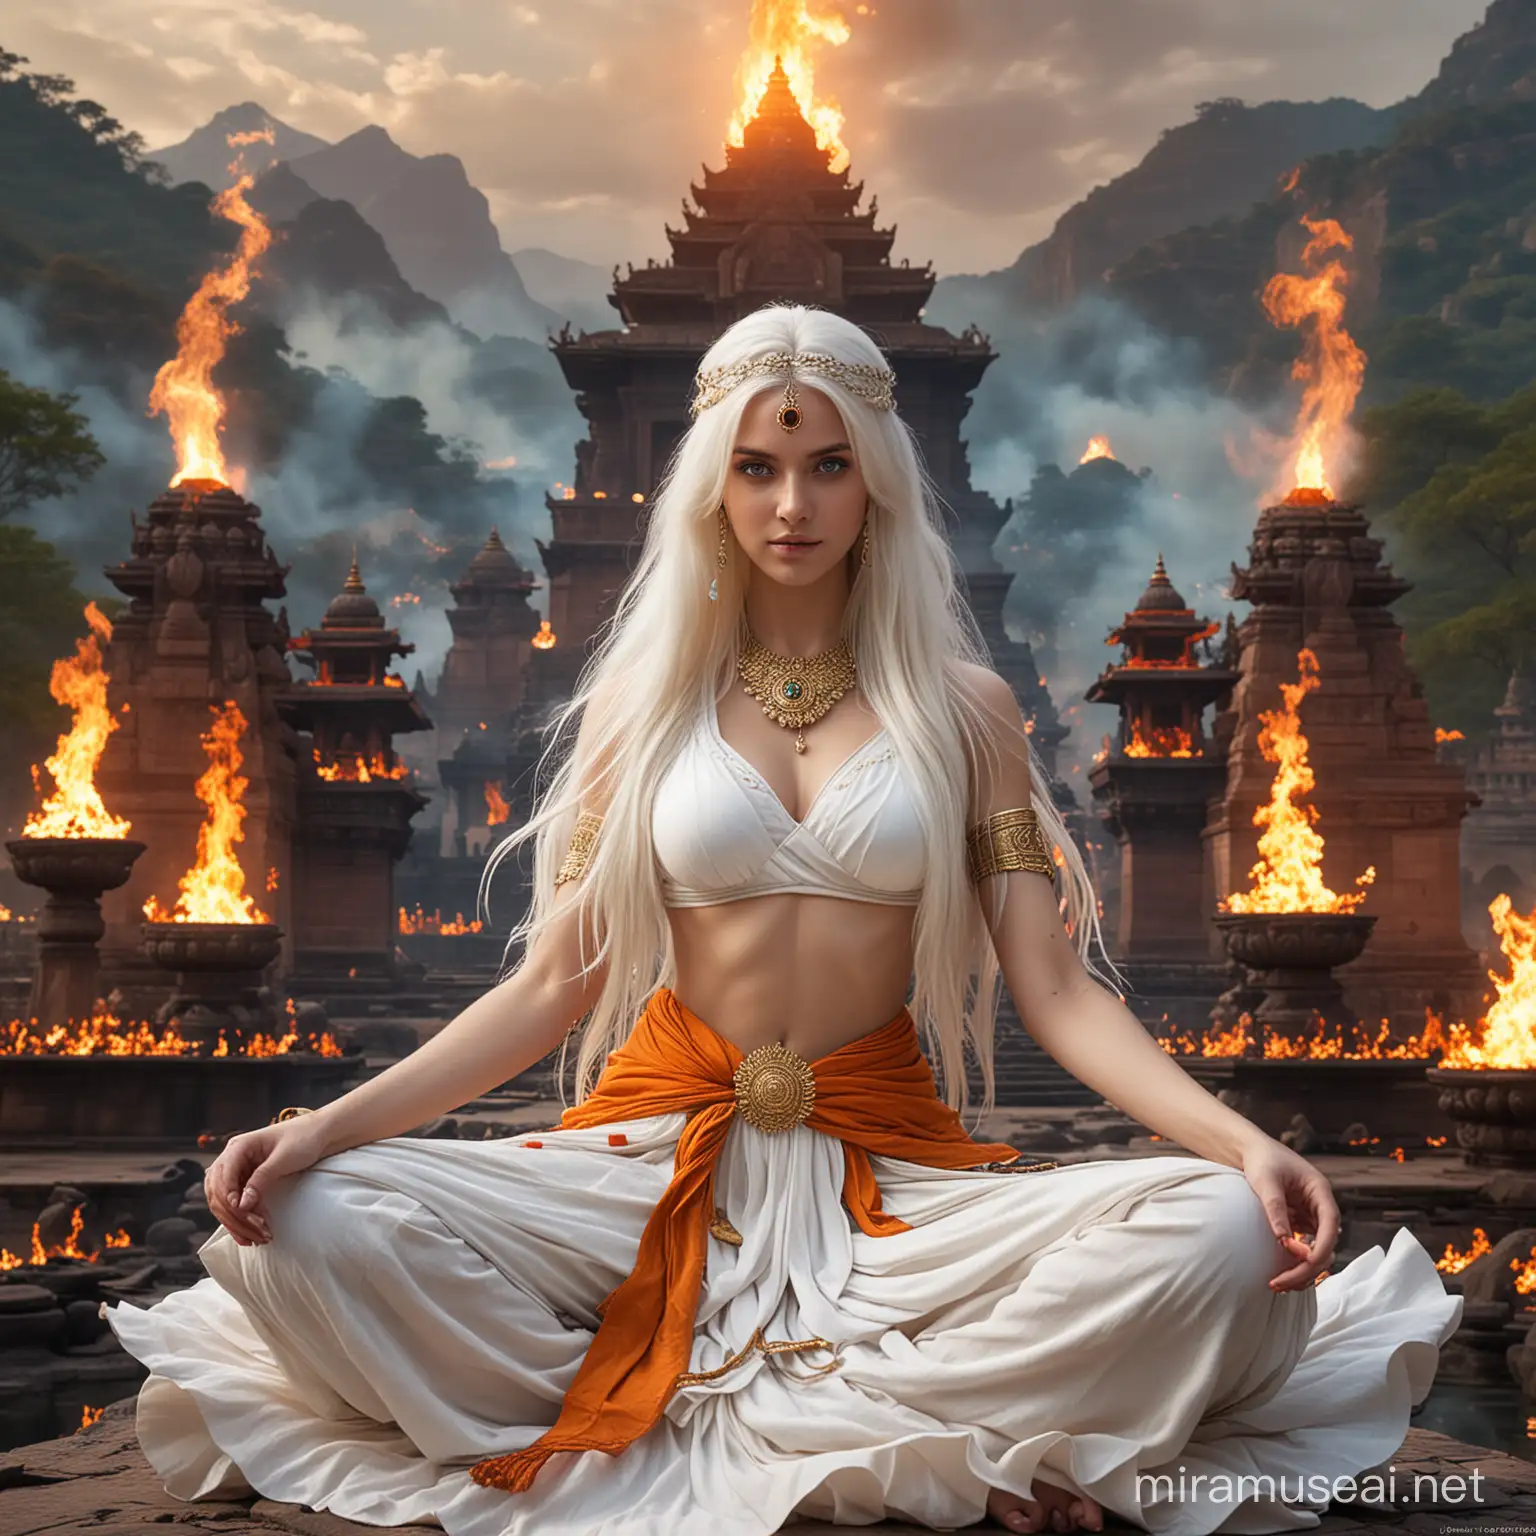 Empress Goddess in Battle Radiant Hindu Deity Surrounded by Flames